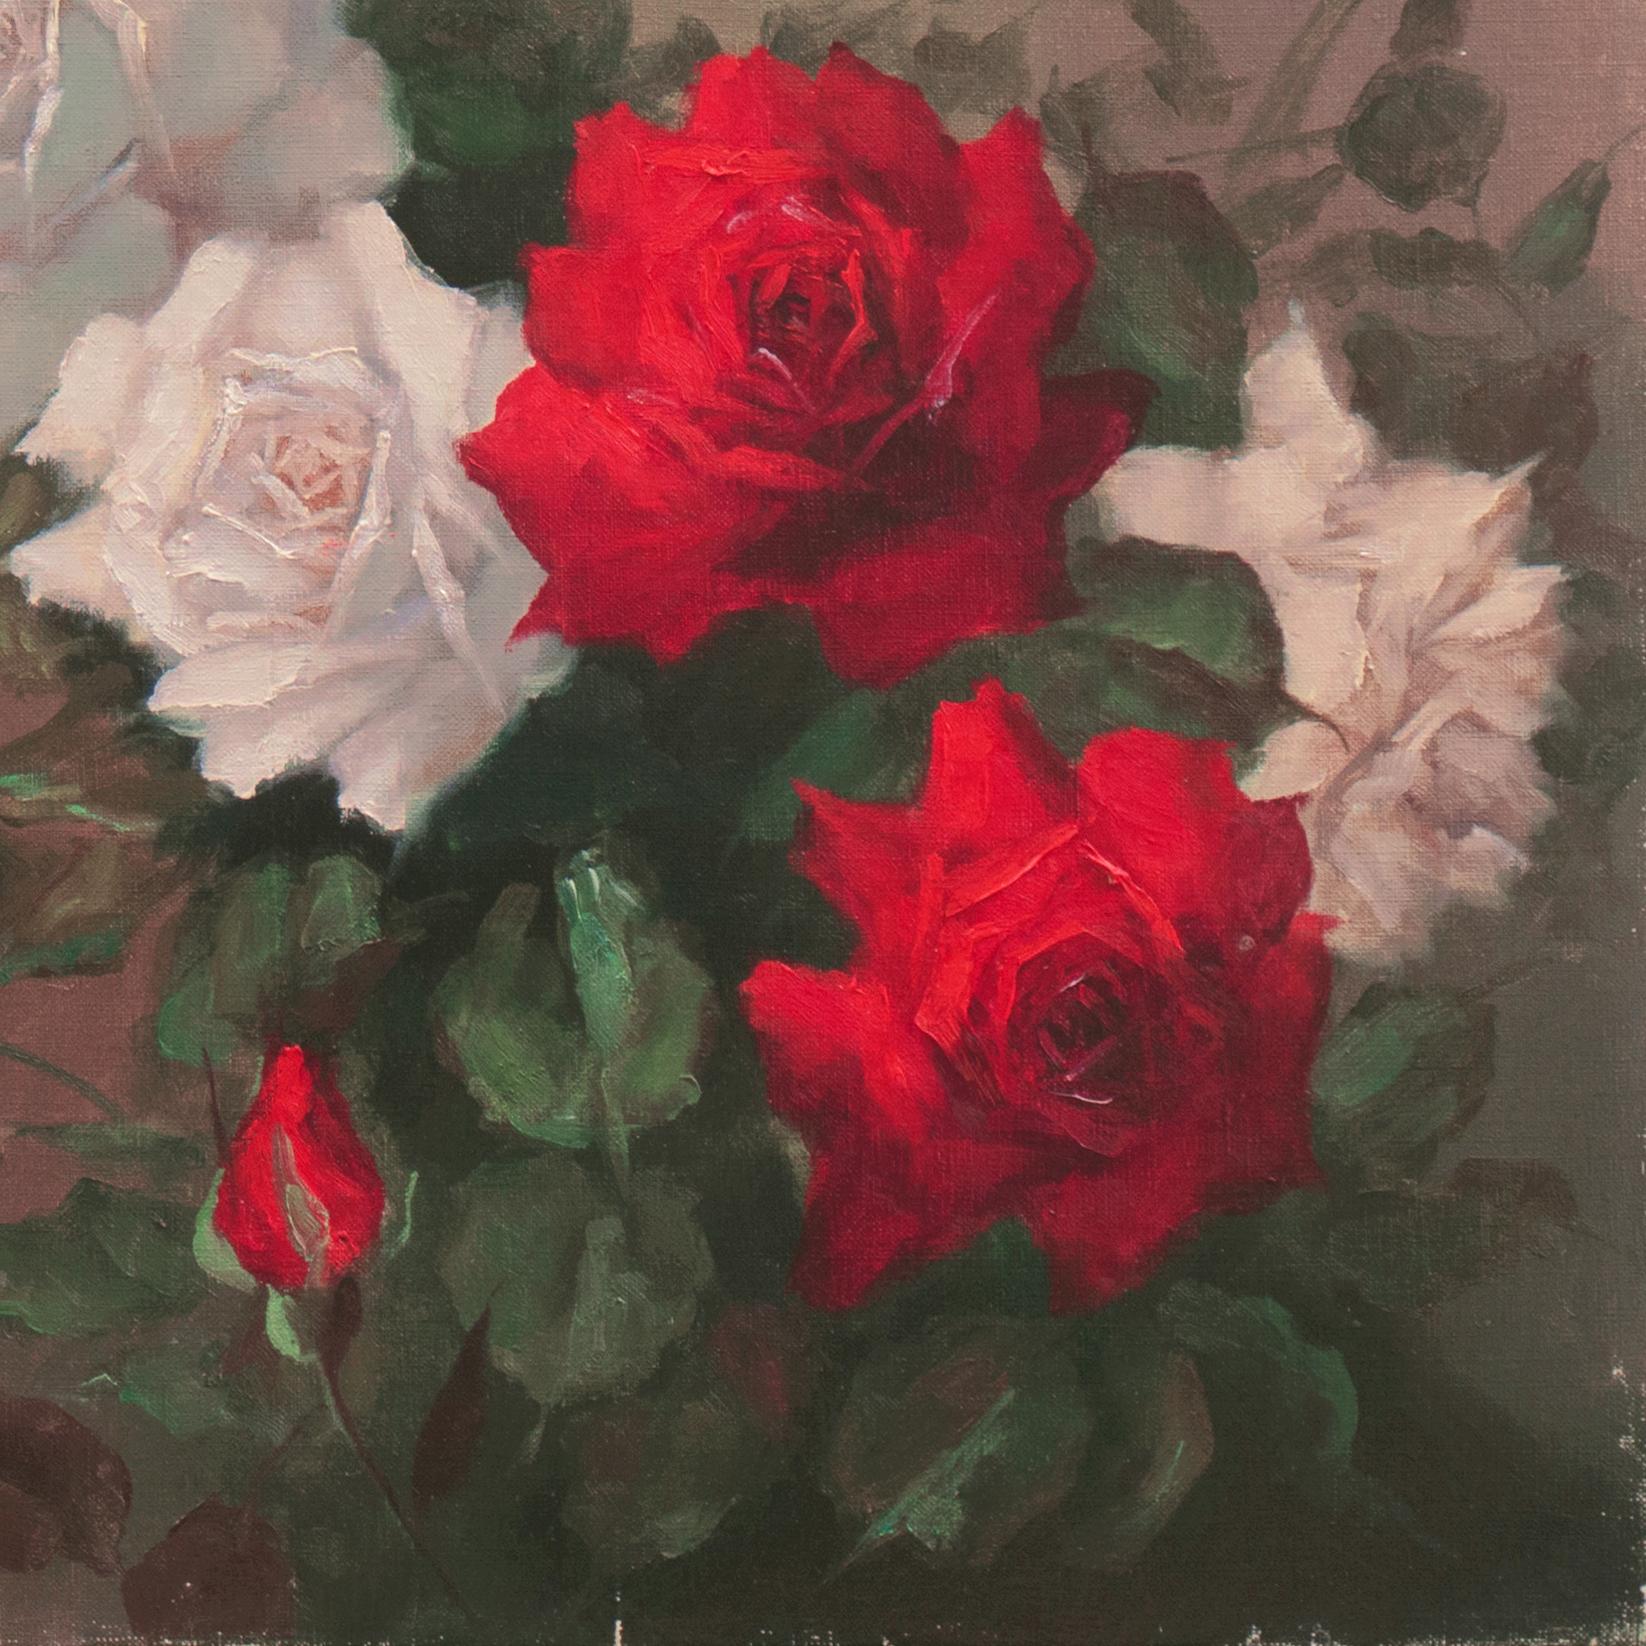 'Red and White Roses', Horticultural, Botanical, Flowers - Impressionist Painting by 20th century American School